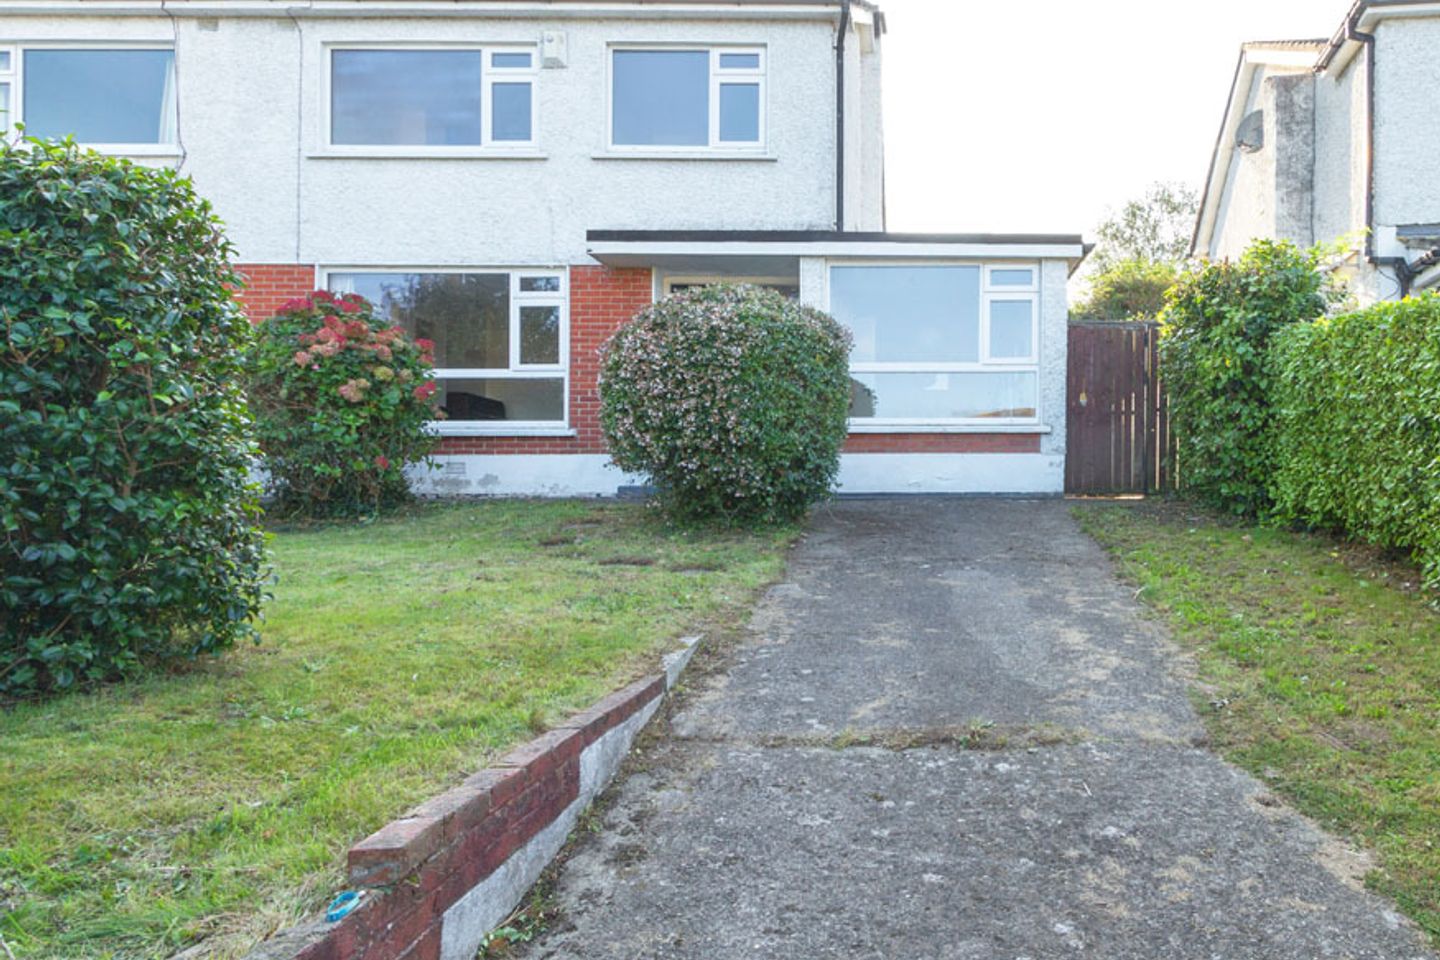 96 Applewood Heights, Greystones, Co. Wicklow, A63KP57